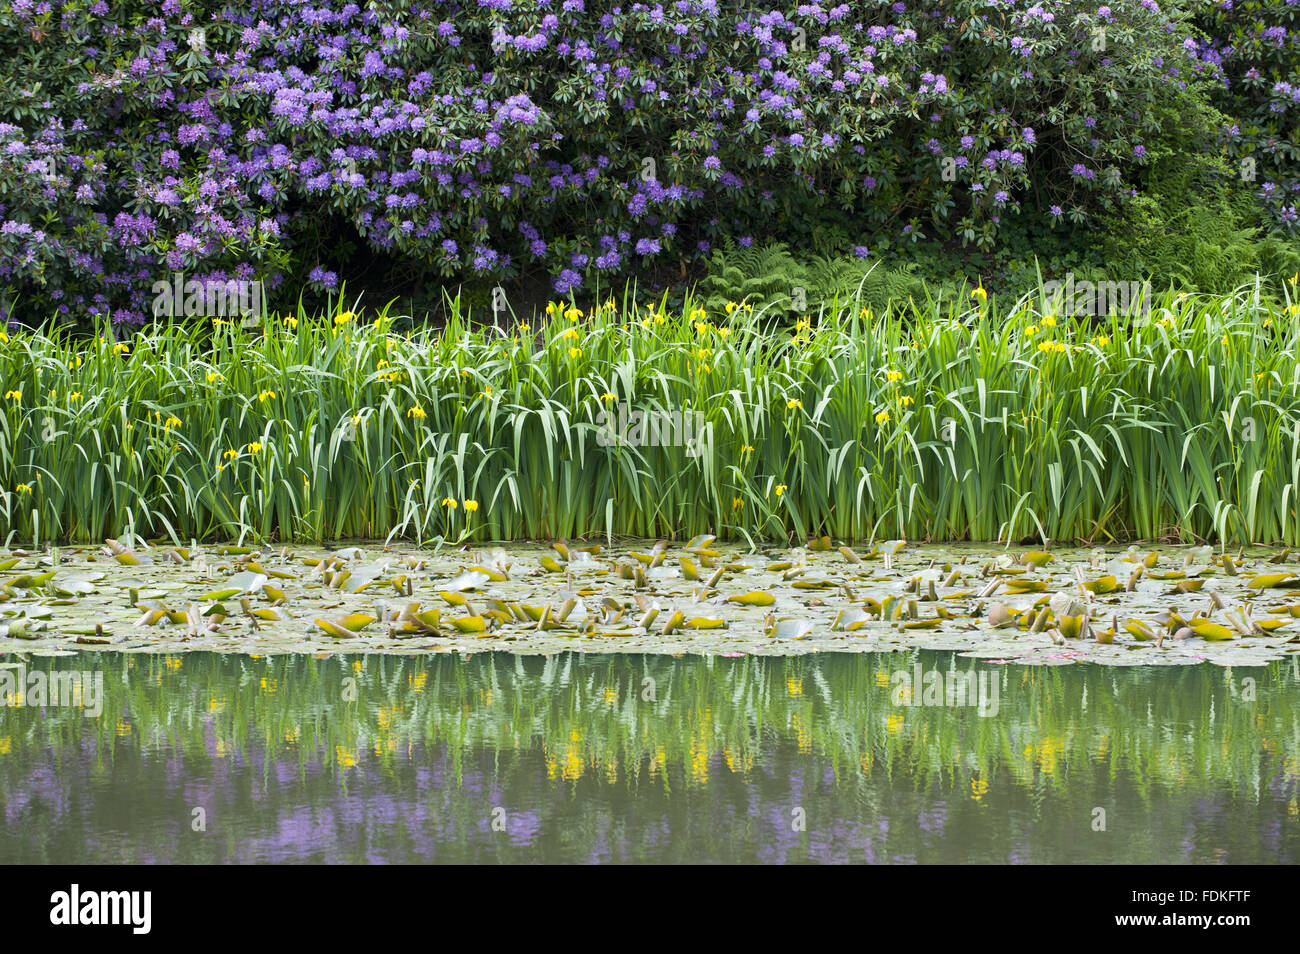 The pool with yellow flag irises, and purple azaleas in the Rhododendron Ground in June at Biddulph Grange Garden, Staffordshire. Stock Photo